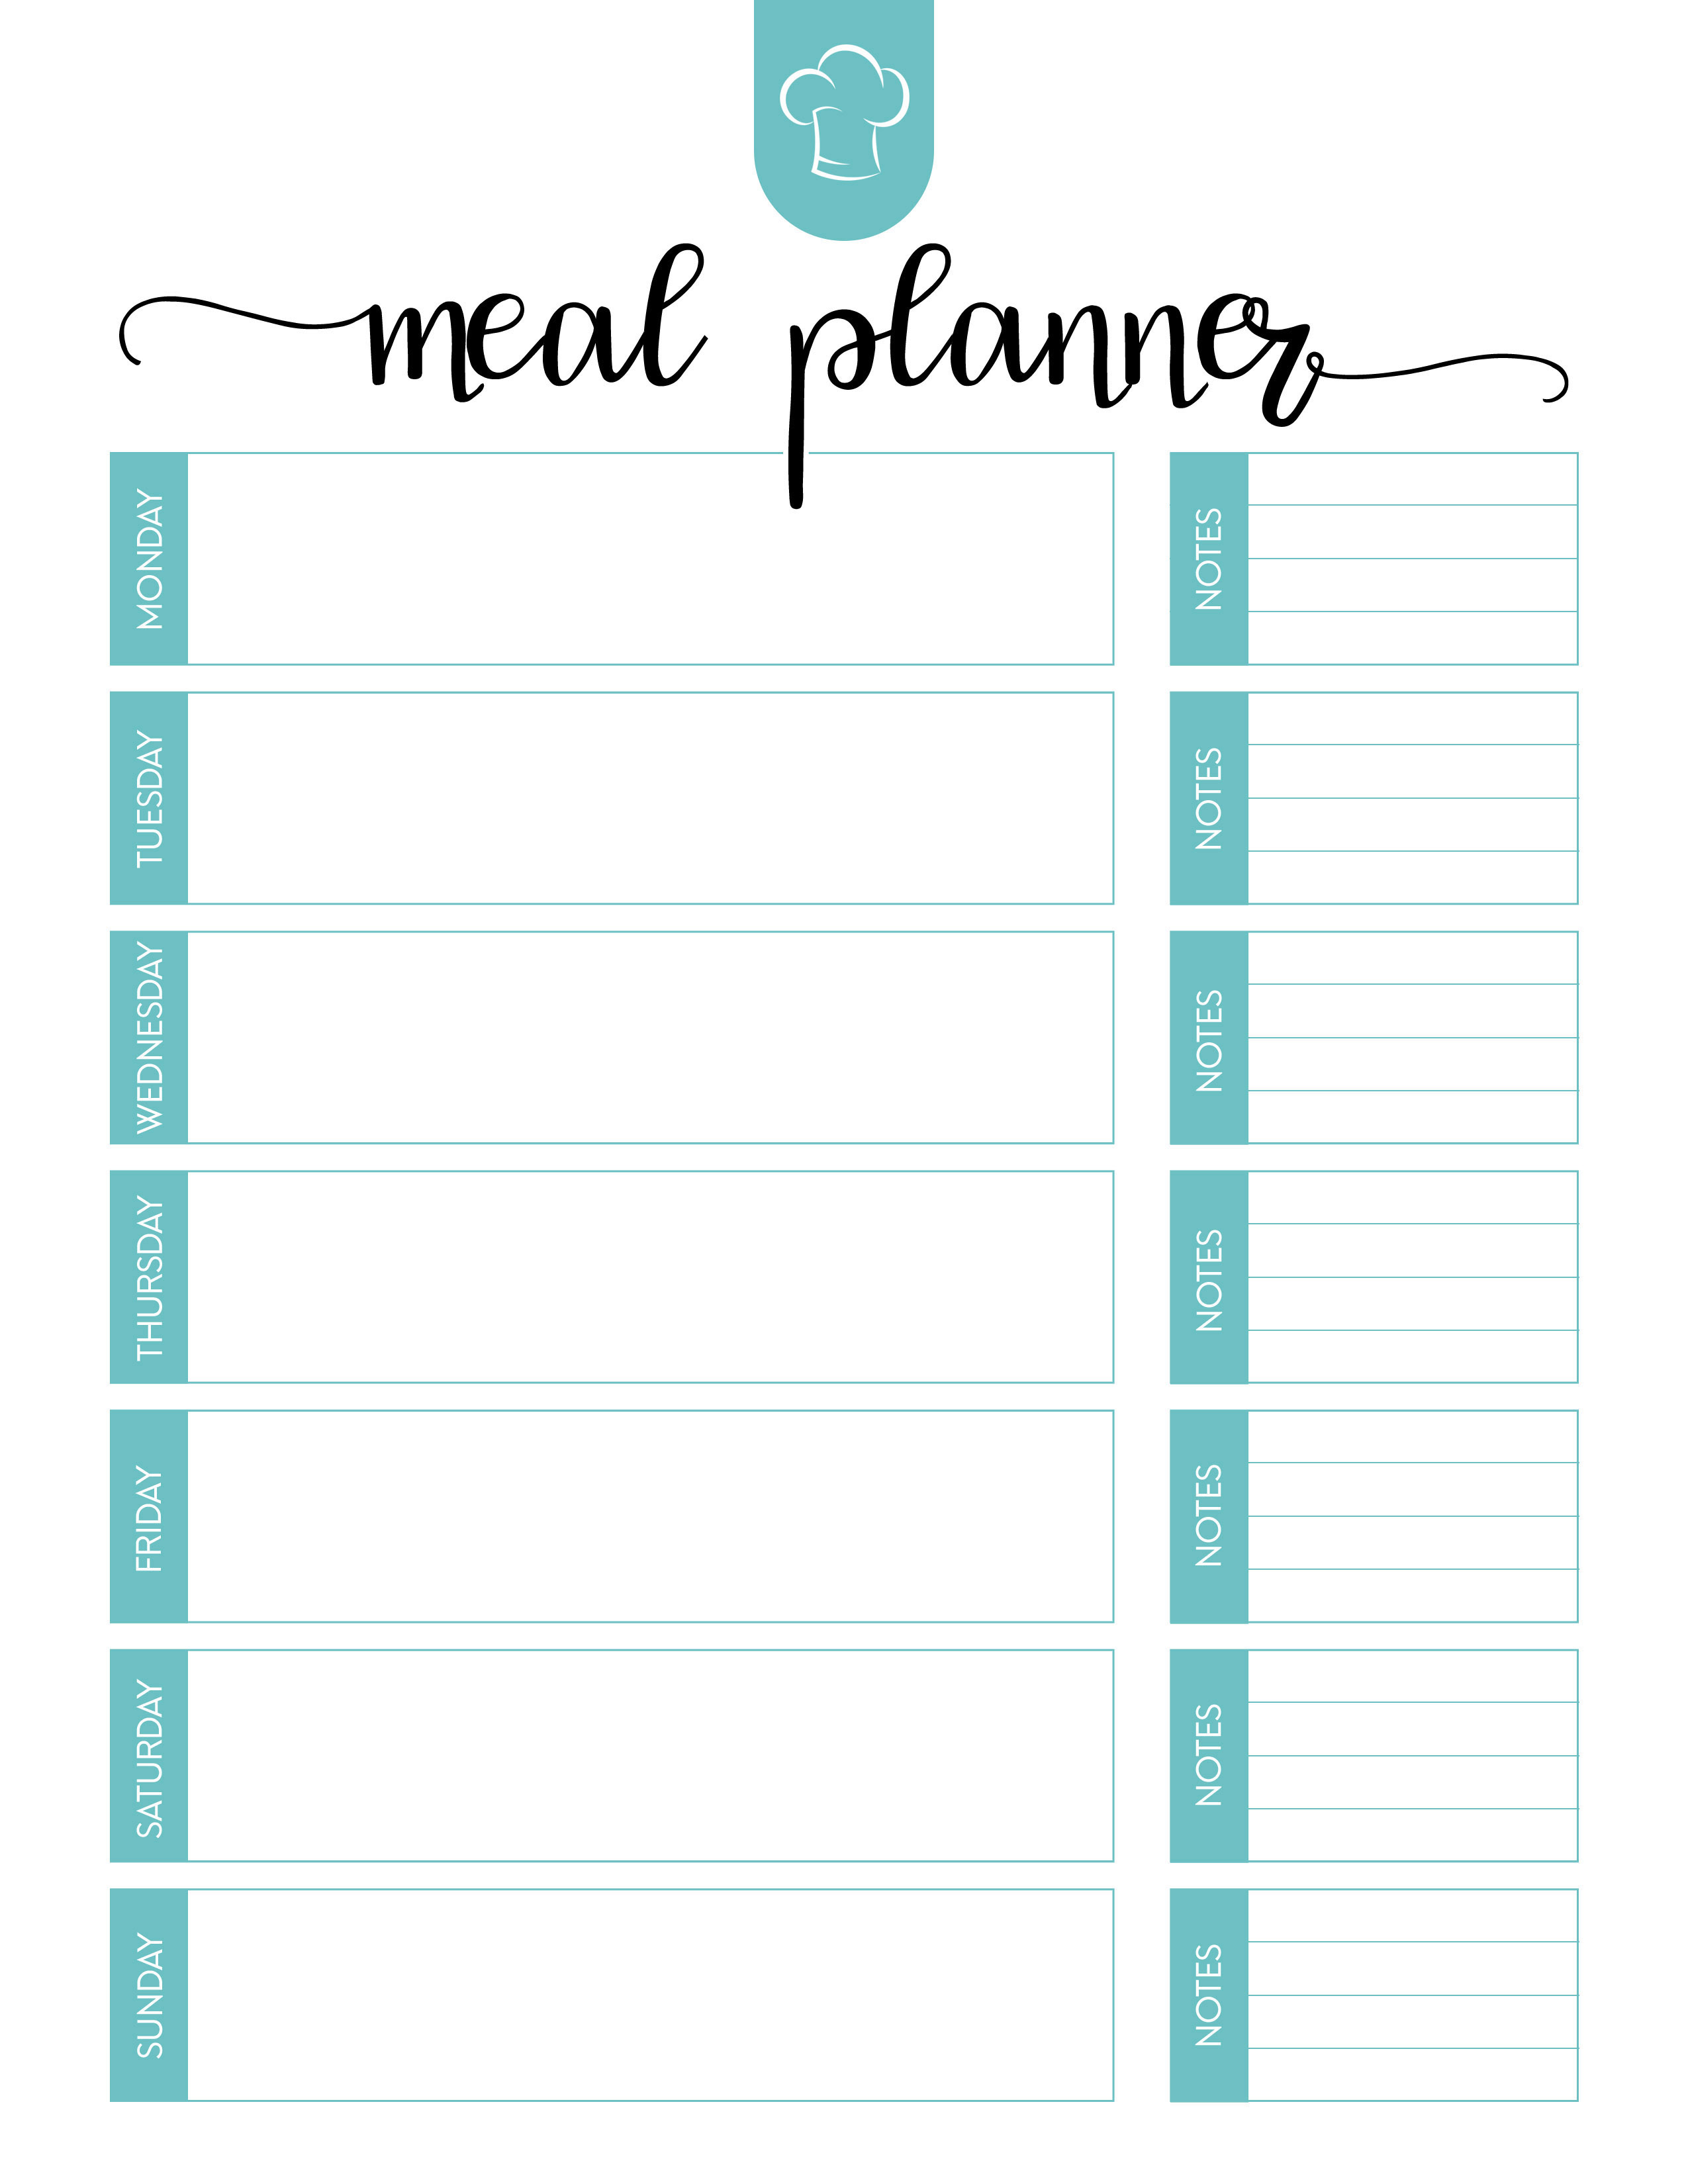 Free Printable Meal Planner Set - The Cottage Market - Free Printable Menu Planner